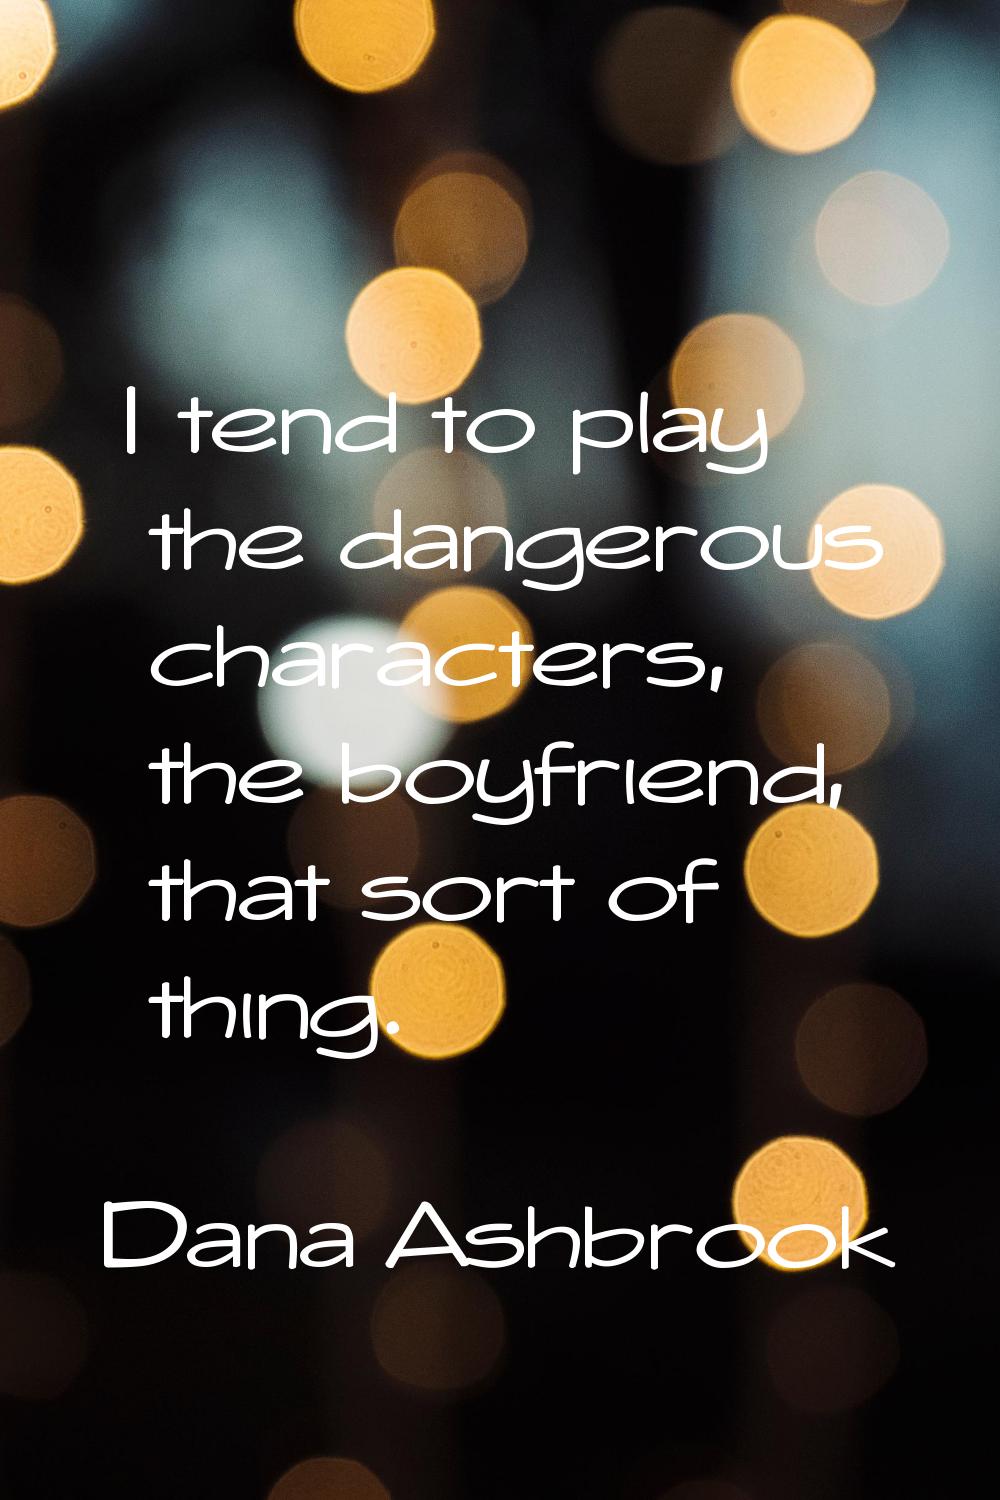 I tend to play the dangerous characters, the boyfriend, that sort of thing.